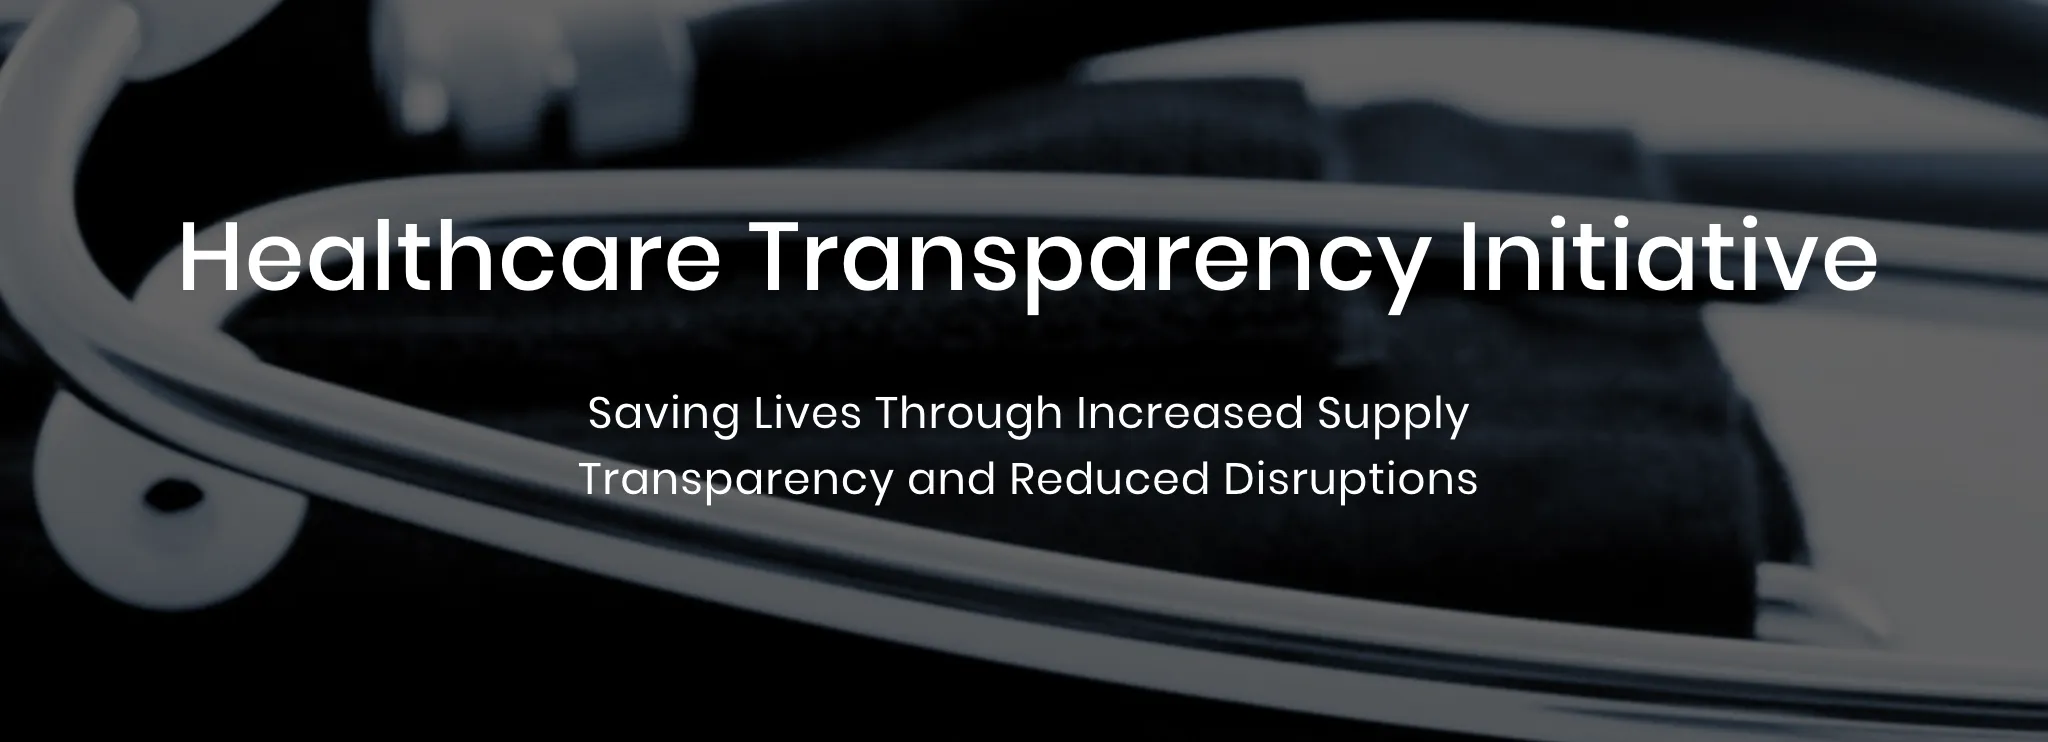 Healthcare Transparency Initiative (HTI) Banner